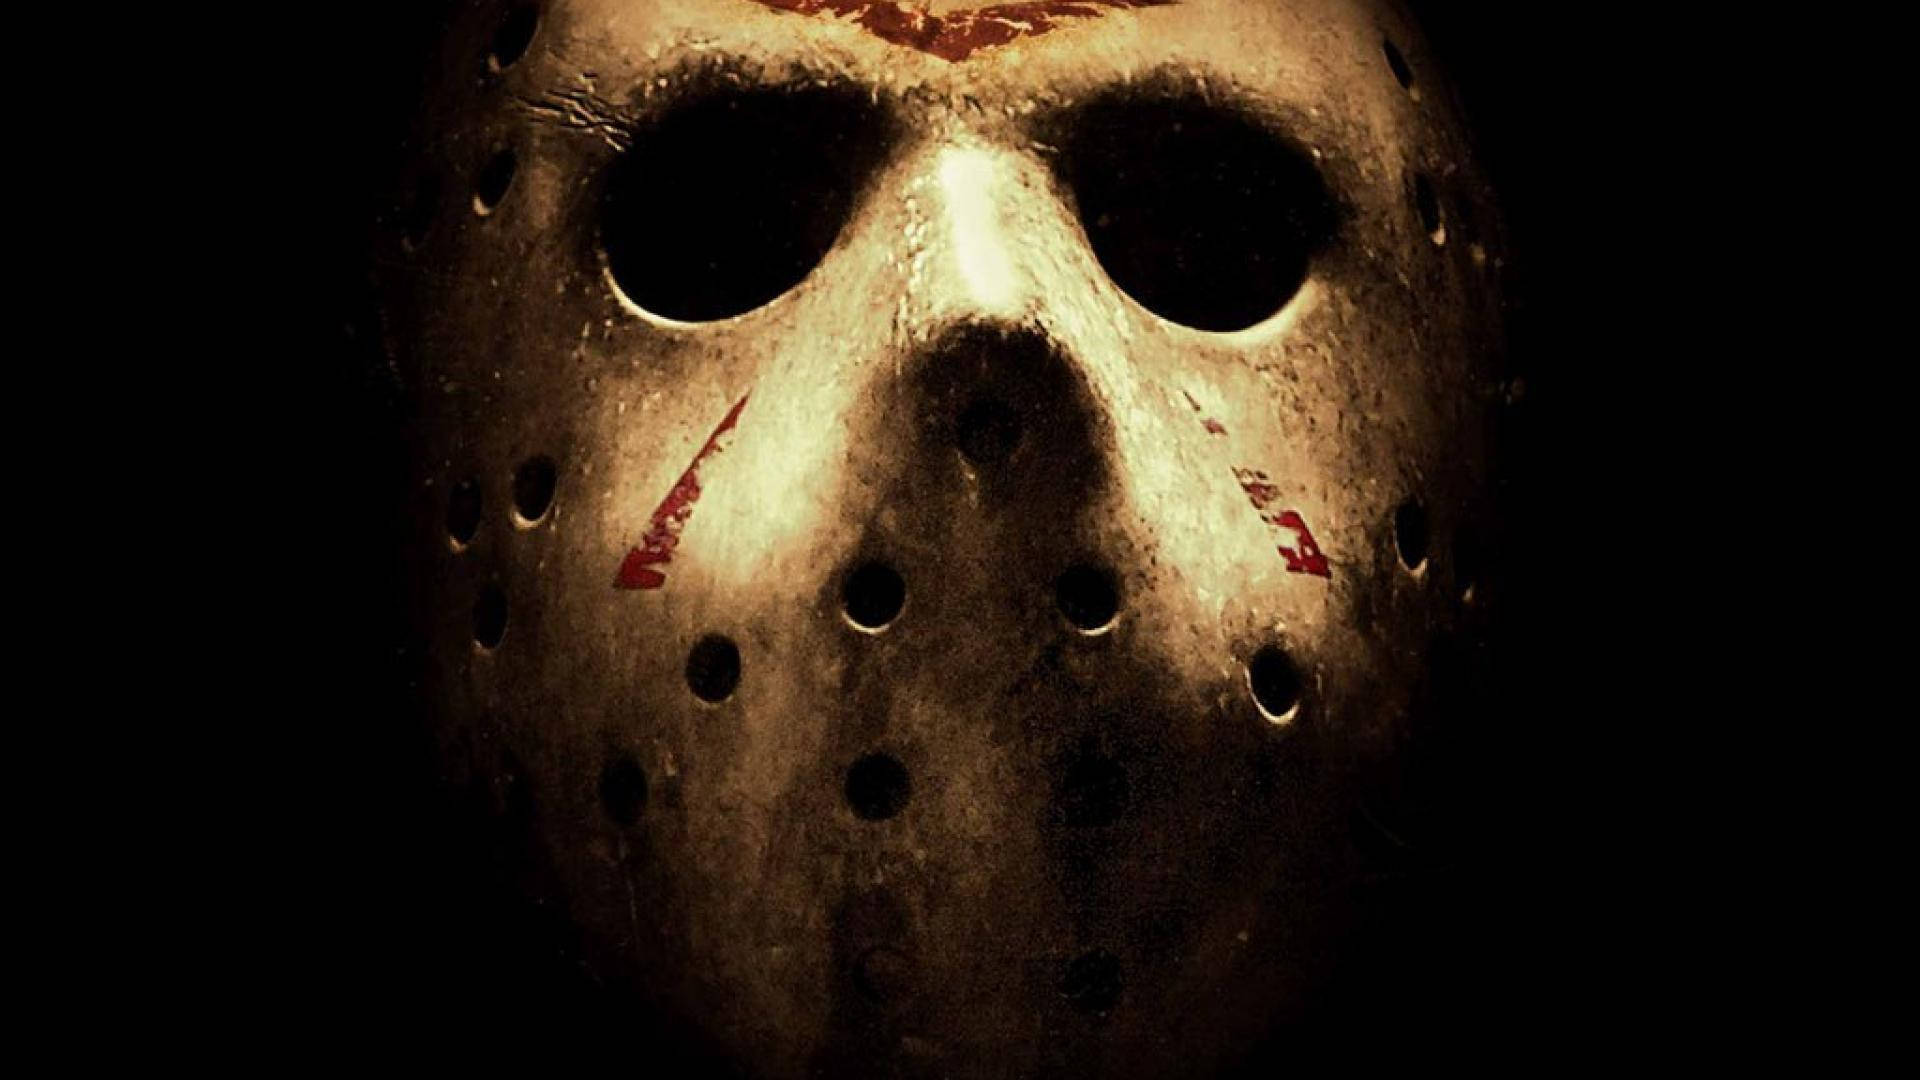 Mask From Horror Movie Friday The 13th Wallpaper